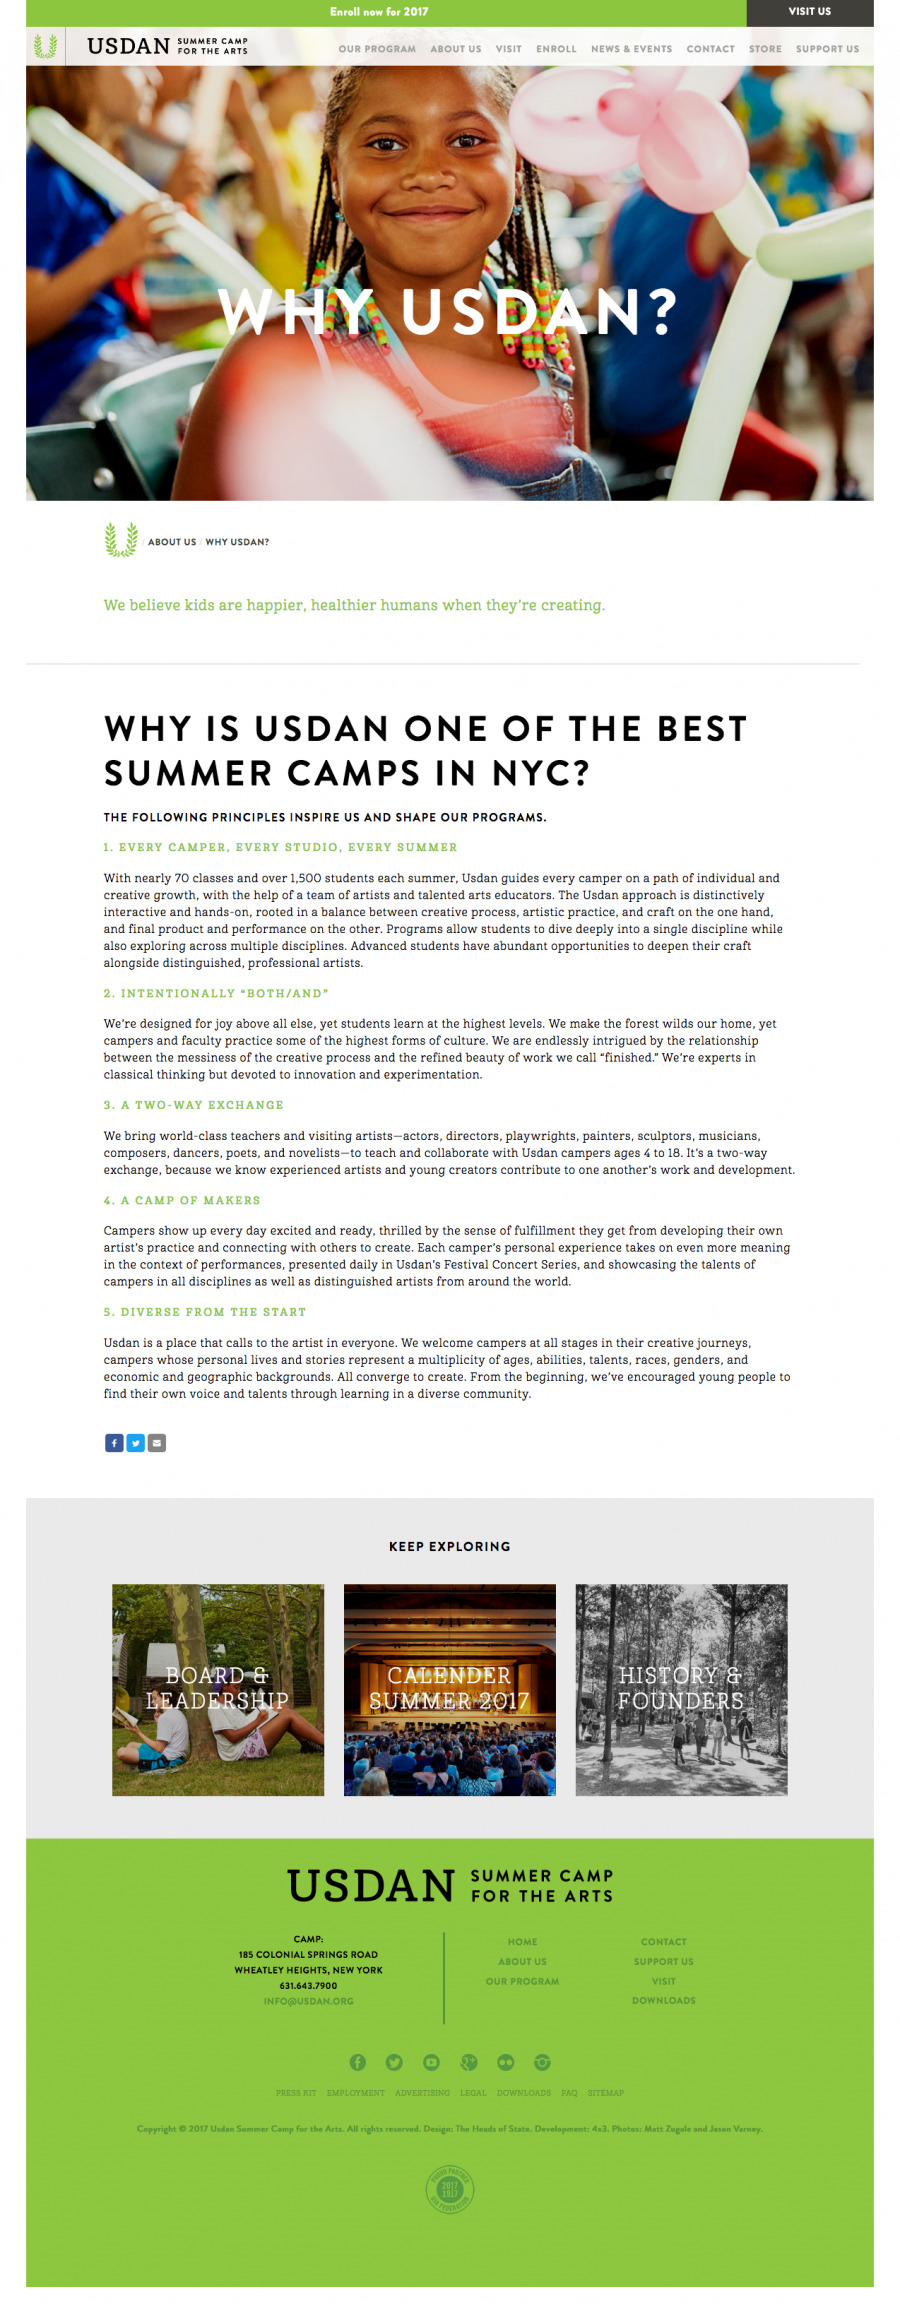 Usdan Landing Page, about the summer camp / frequently asked questions